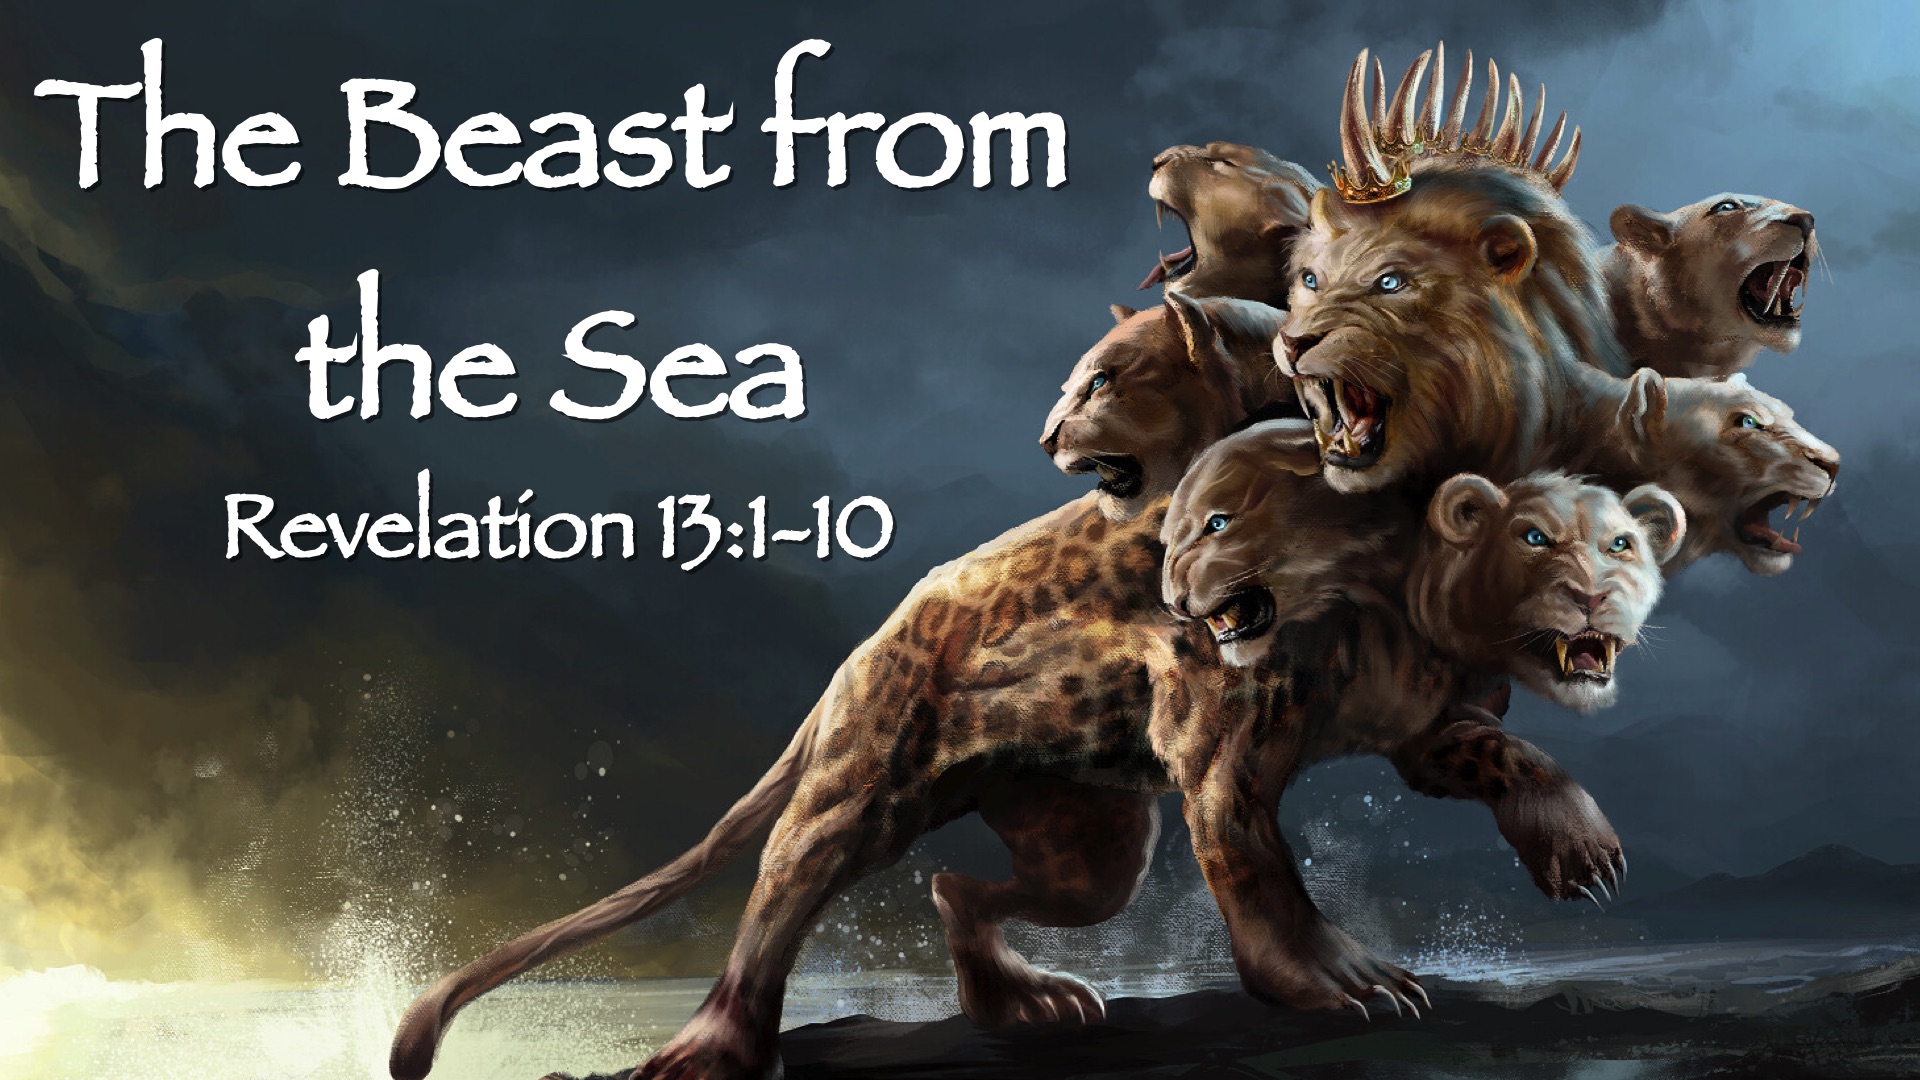 “The Book of Revelation: The Beast from the Sea”